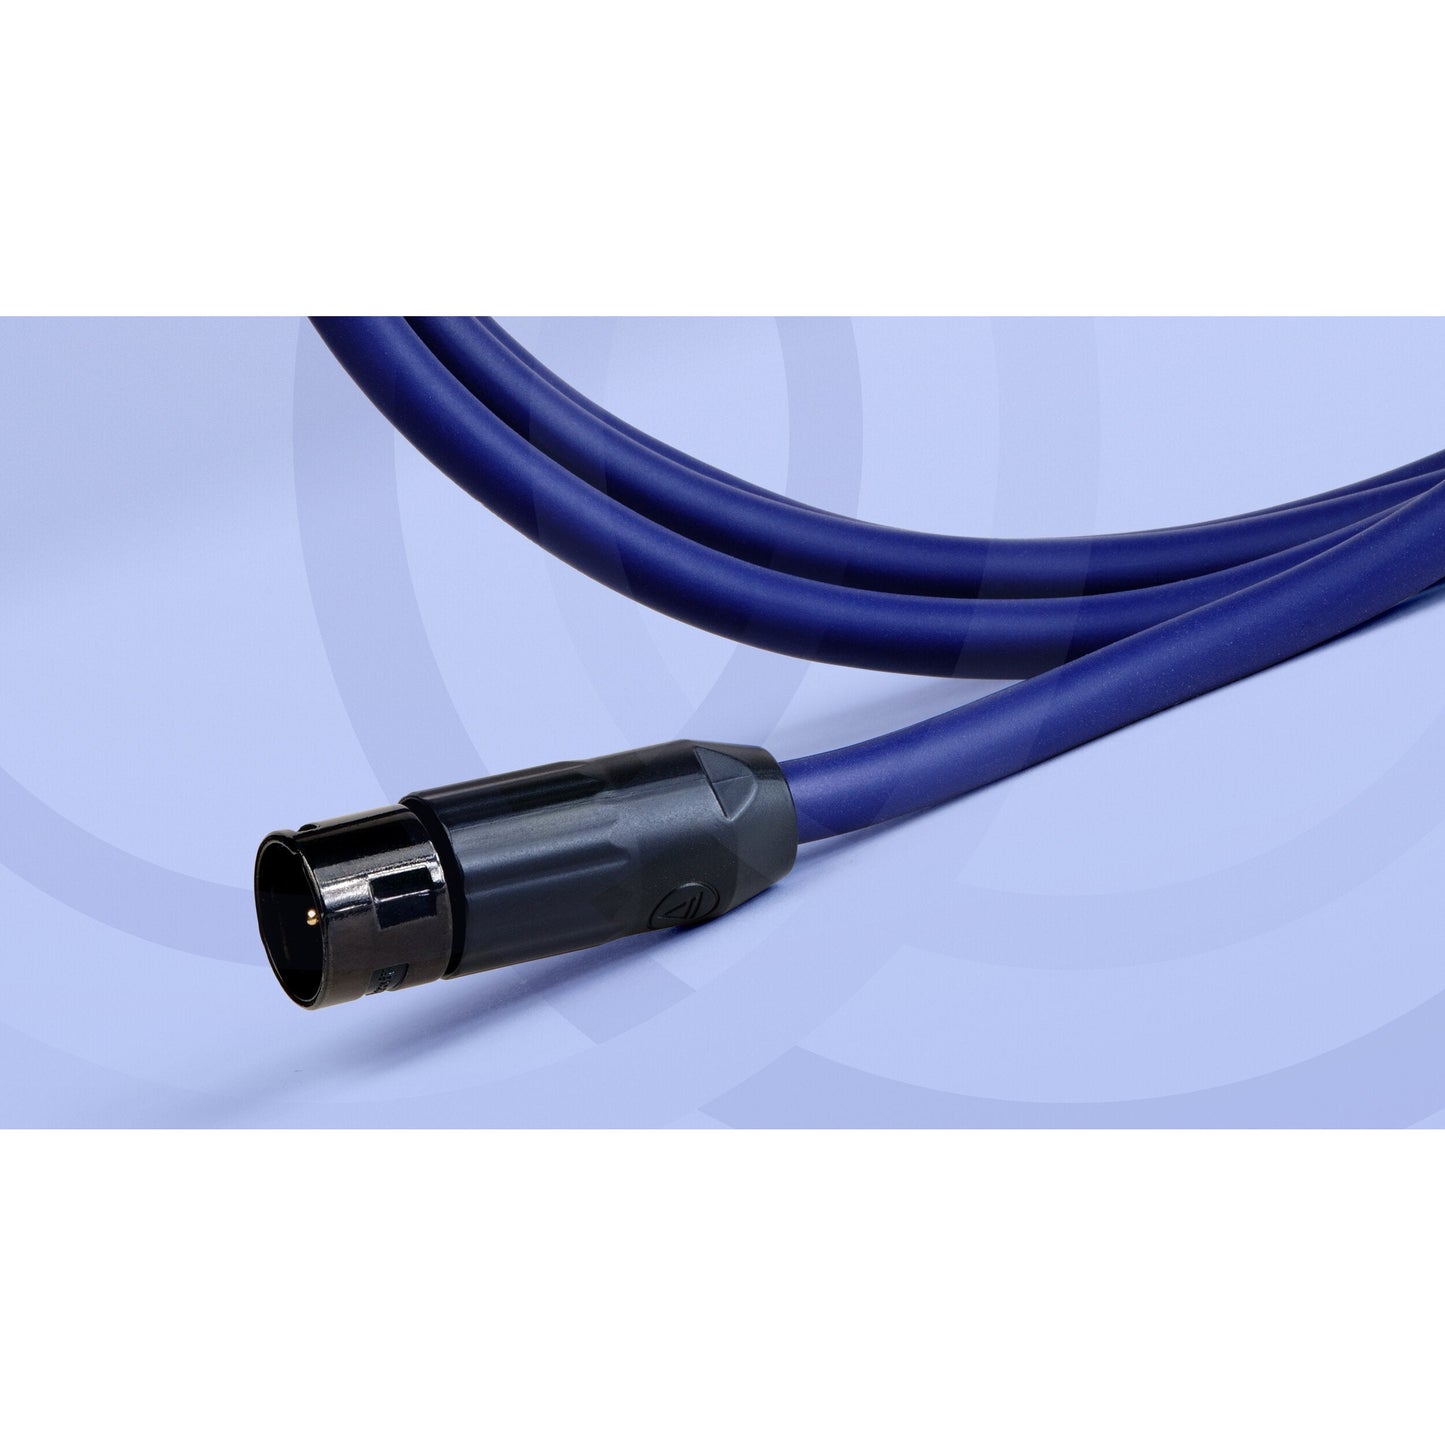 Connected Fidelity Unity XLR Interconnect Cables